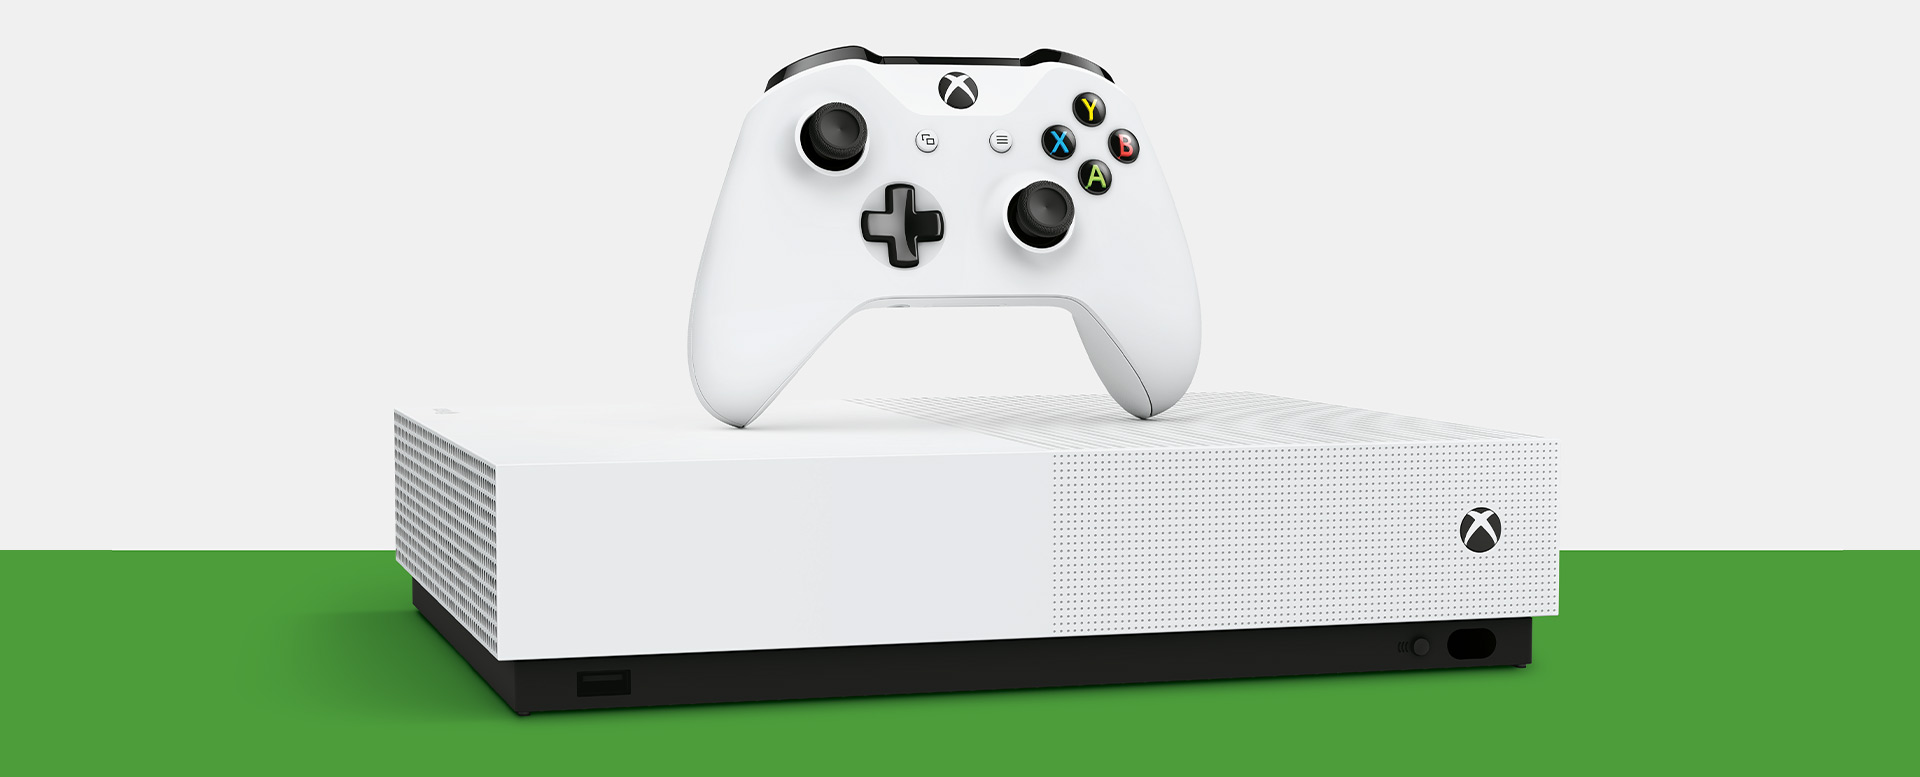 Microsoft officially reveals the XBox One S All-Digital Edition